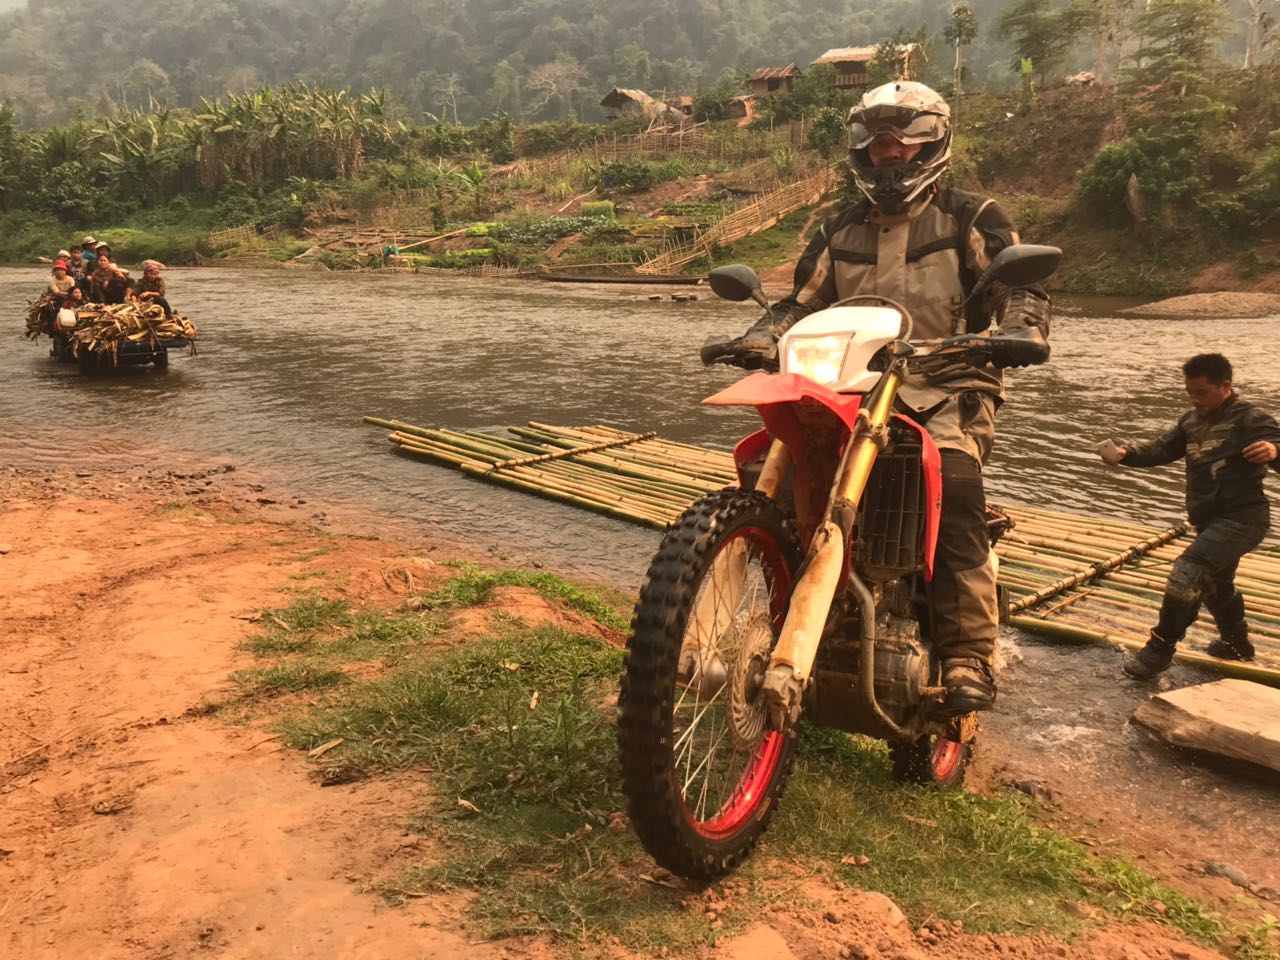 LUXURY LAOS DIRT BIKE TOUR FROM WEST TO EAST